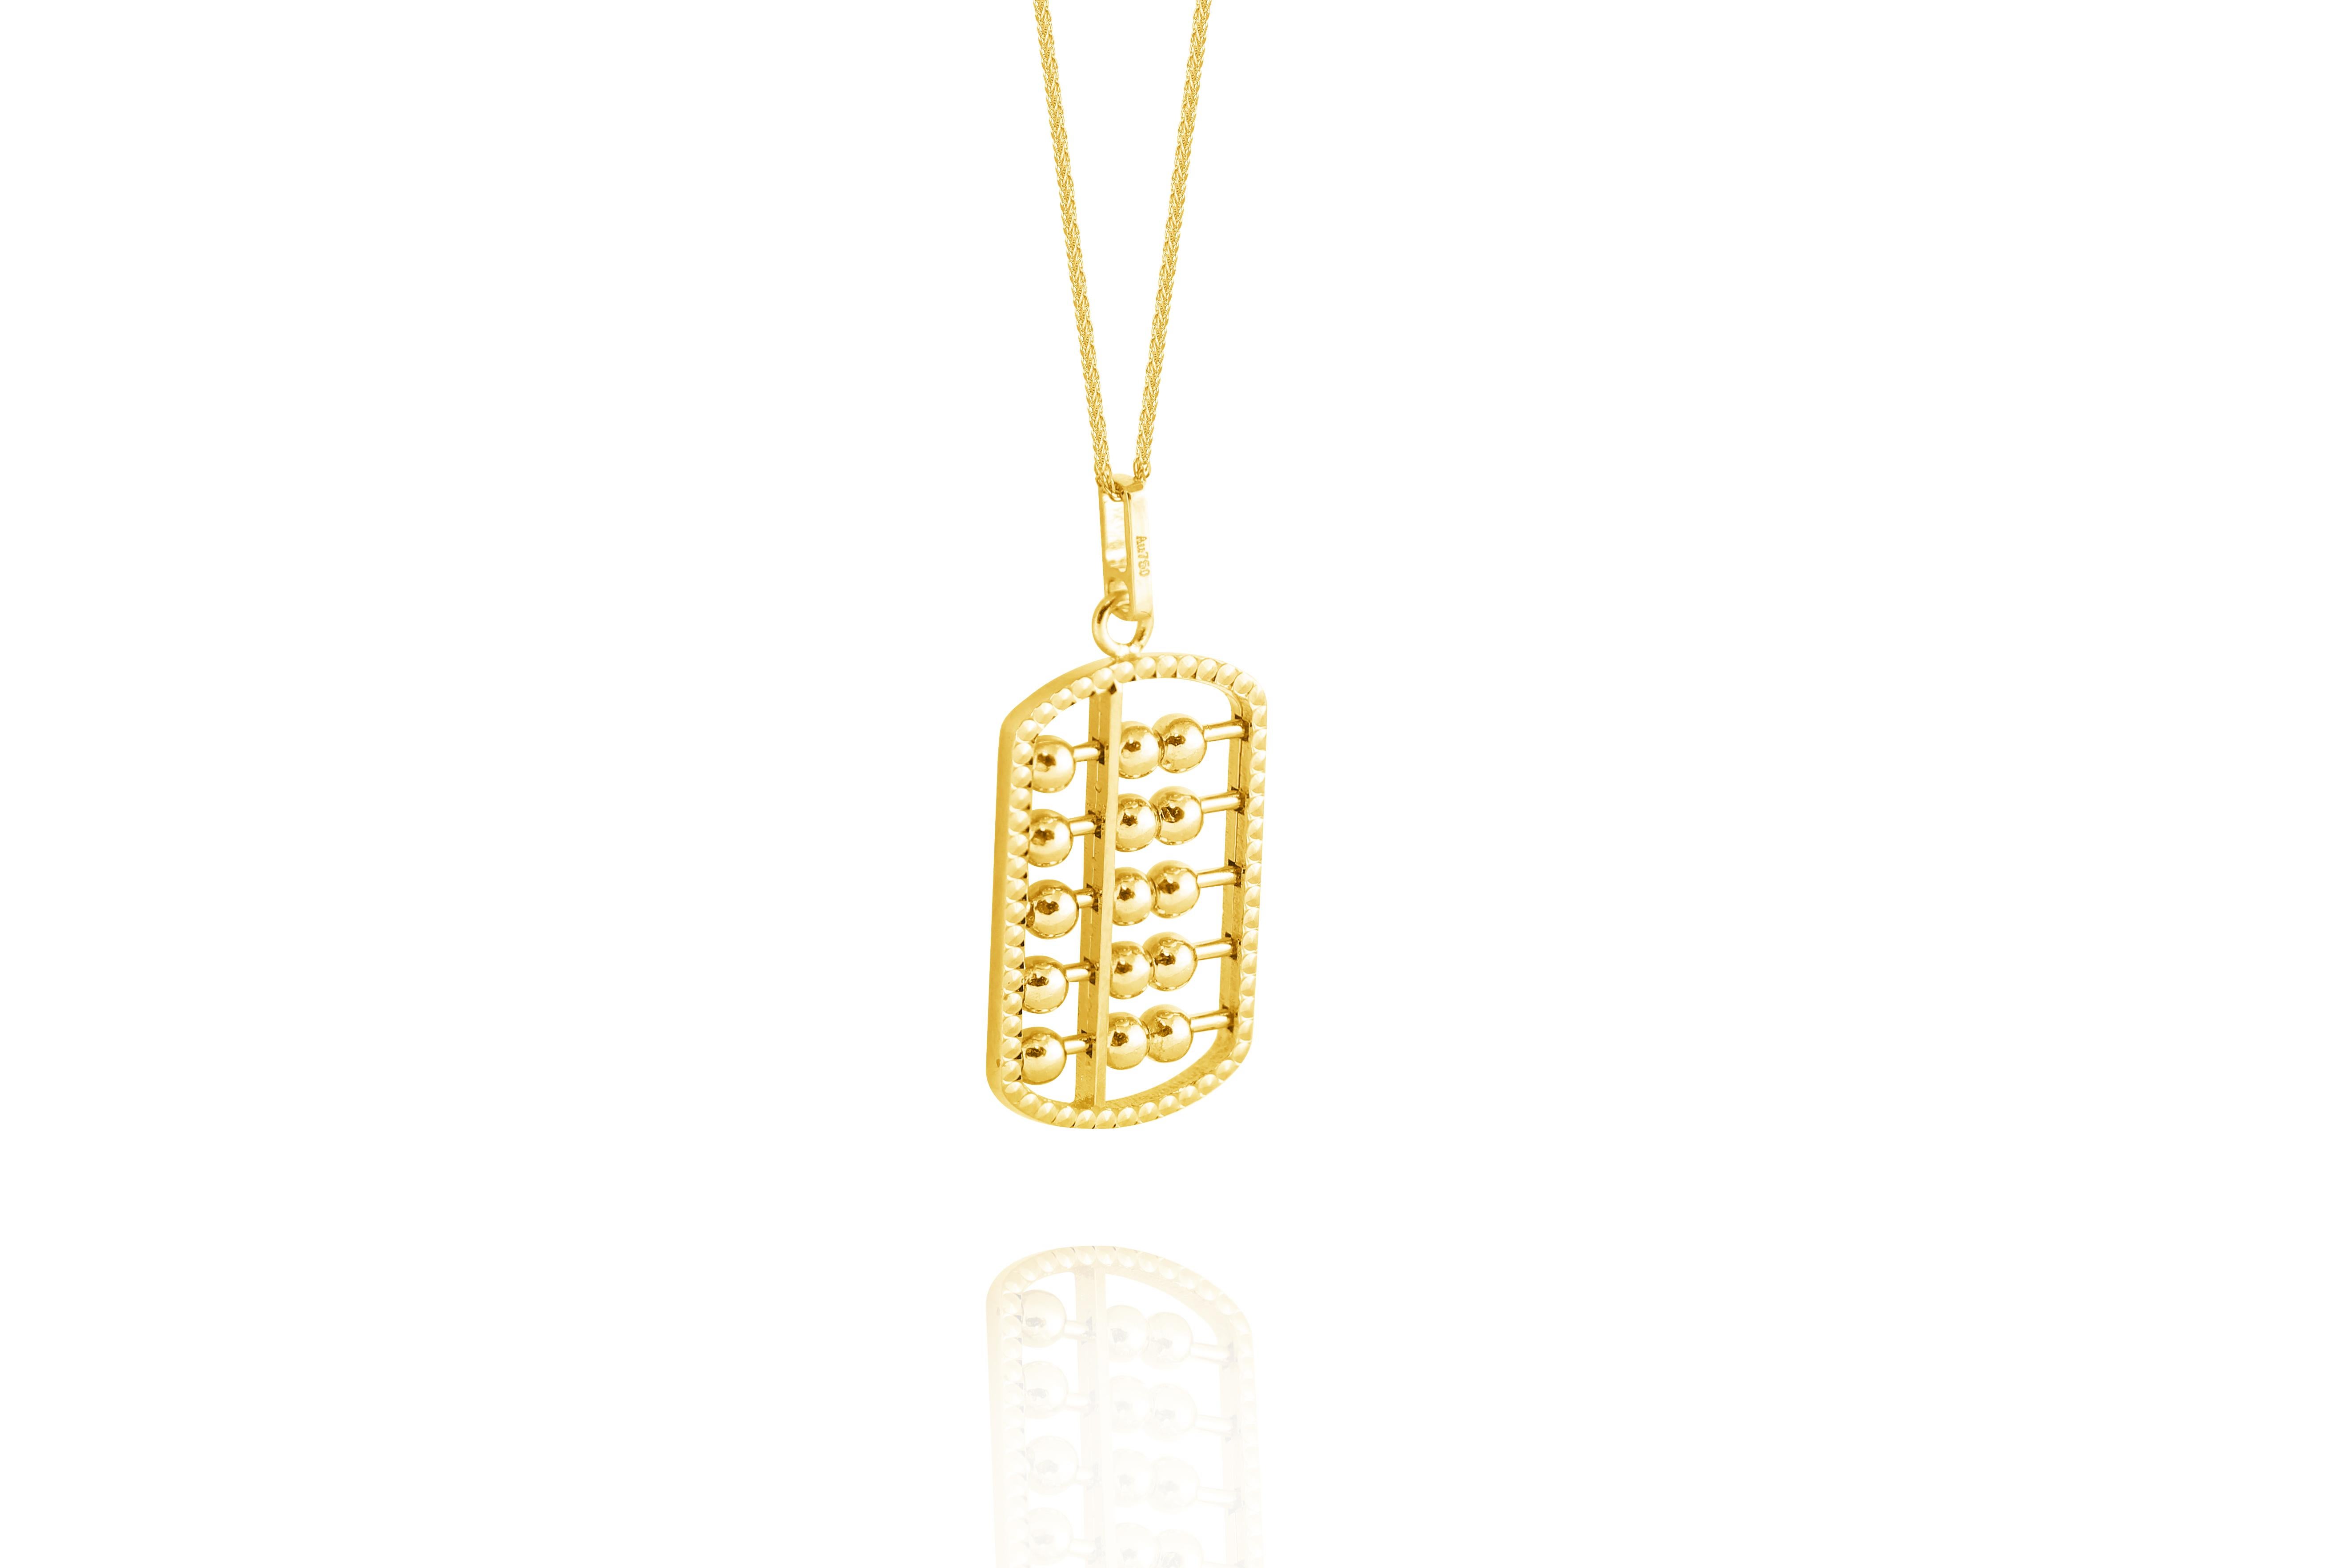 Abacus pendant with moving beads mounted in 18 Karat yellow gold.
Abacus, invented in ancient China  more than 2,600 years ago, is a traditional computing tool for businesses and widely used in Asian countries before the modern calculator was